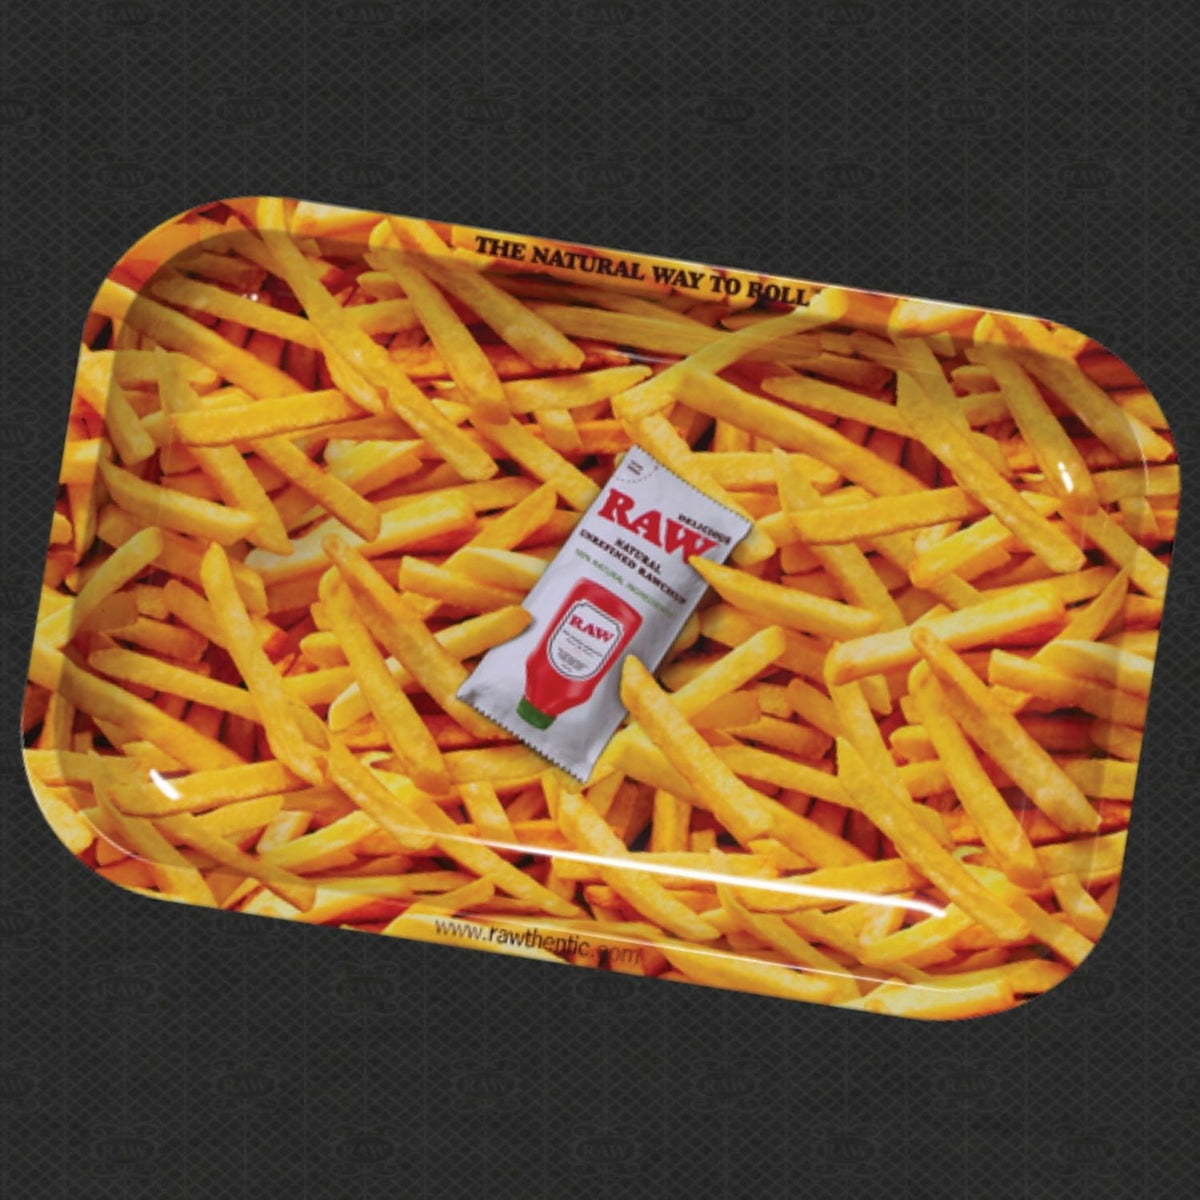 RAW French Fries Rolling Tray - Small